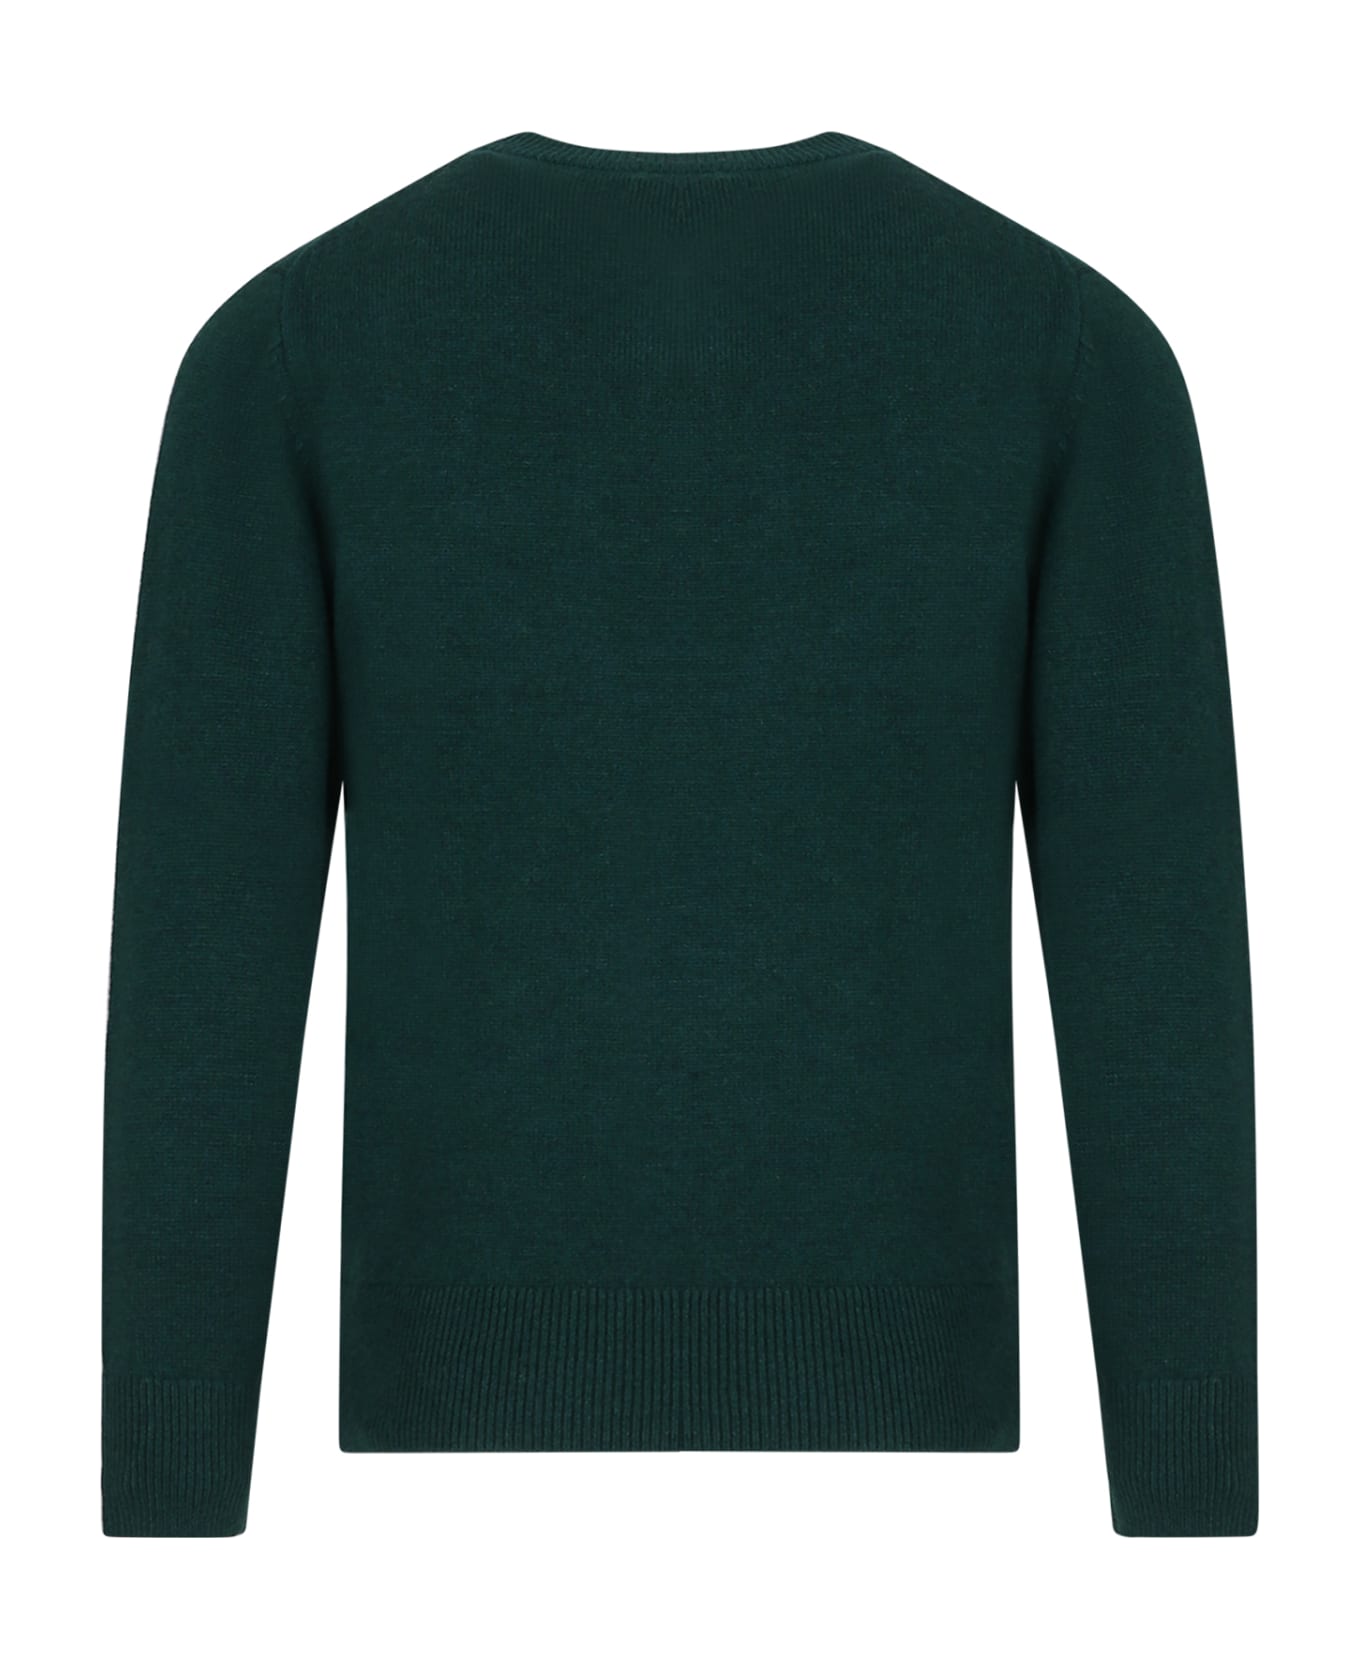 MC2 Saint Barth Green Sweater For Boy With Snoopy - Green